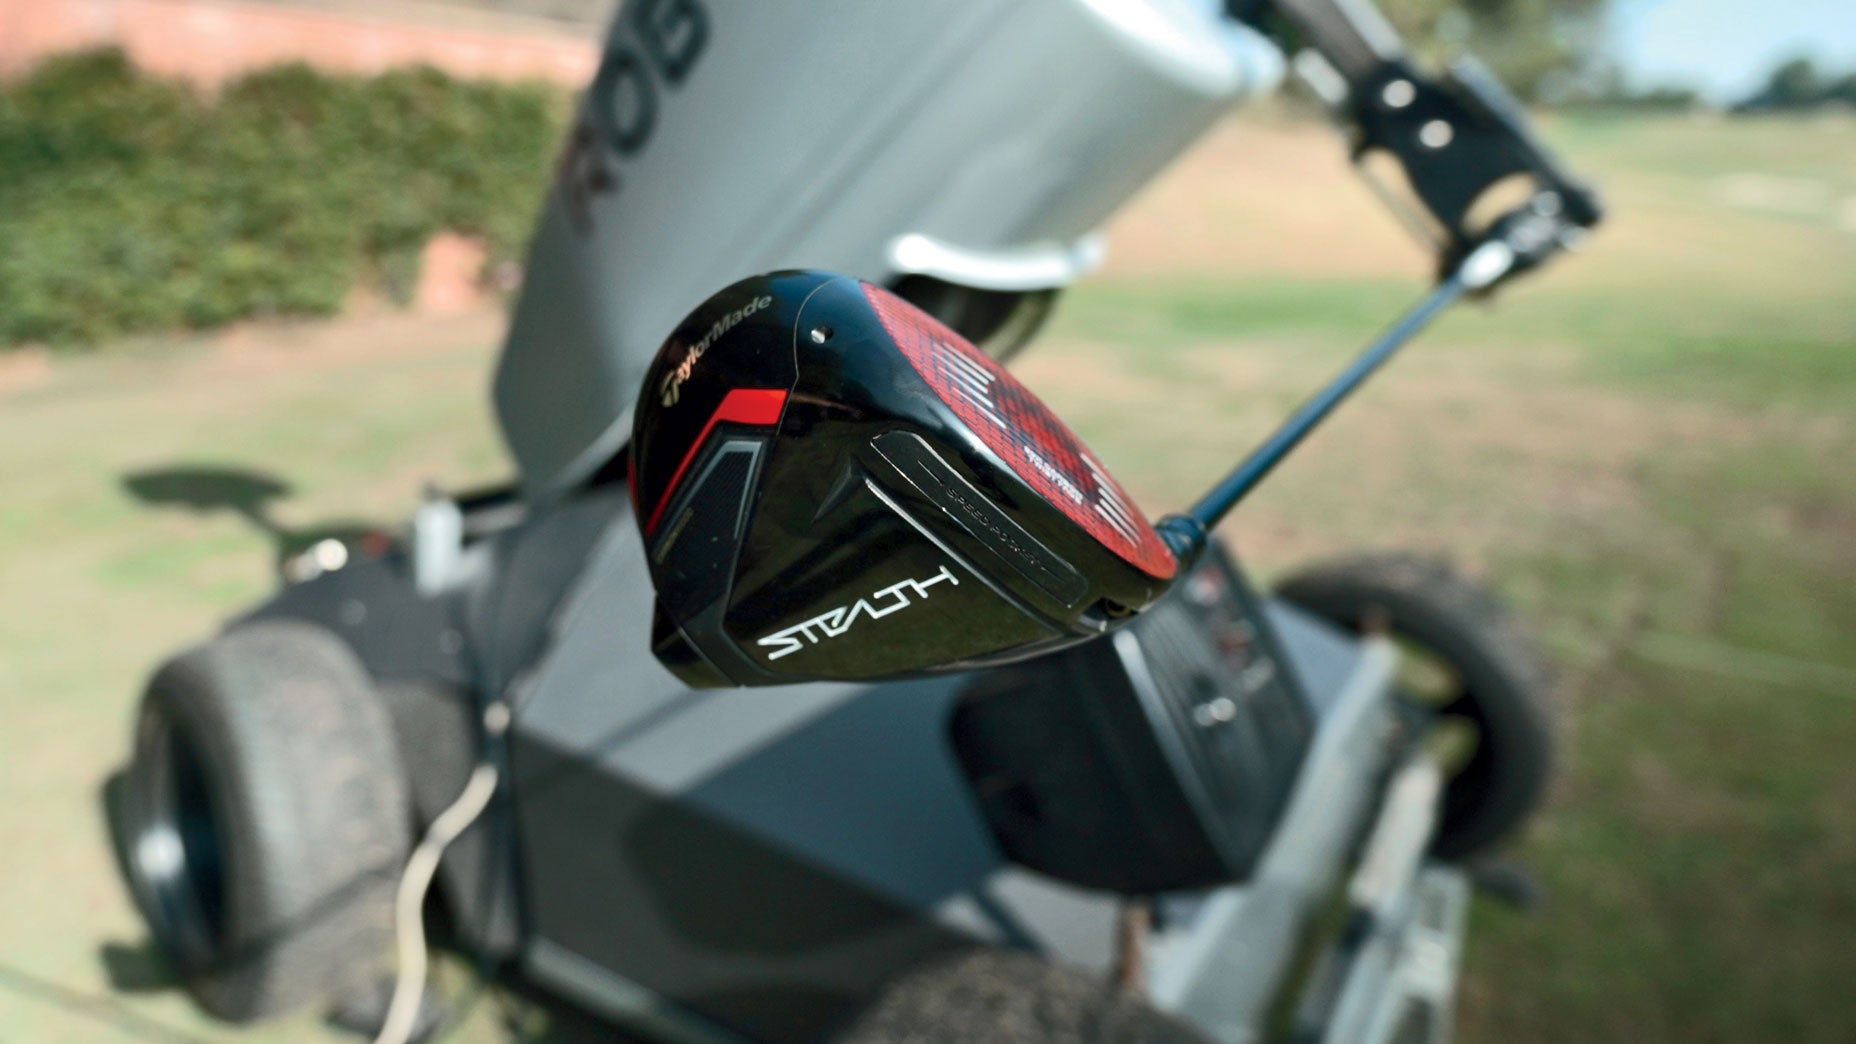 We put this driver loft theory to the test with out ClubTest robot.